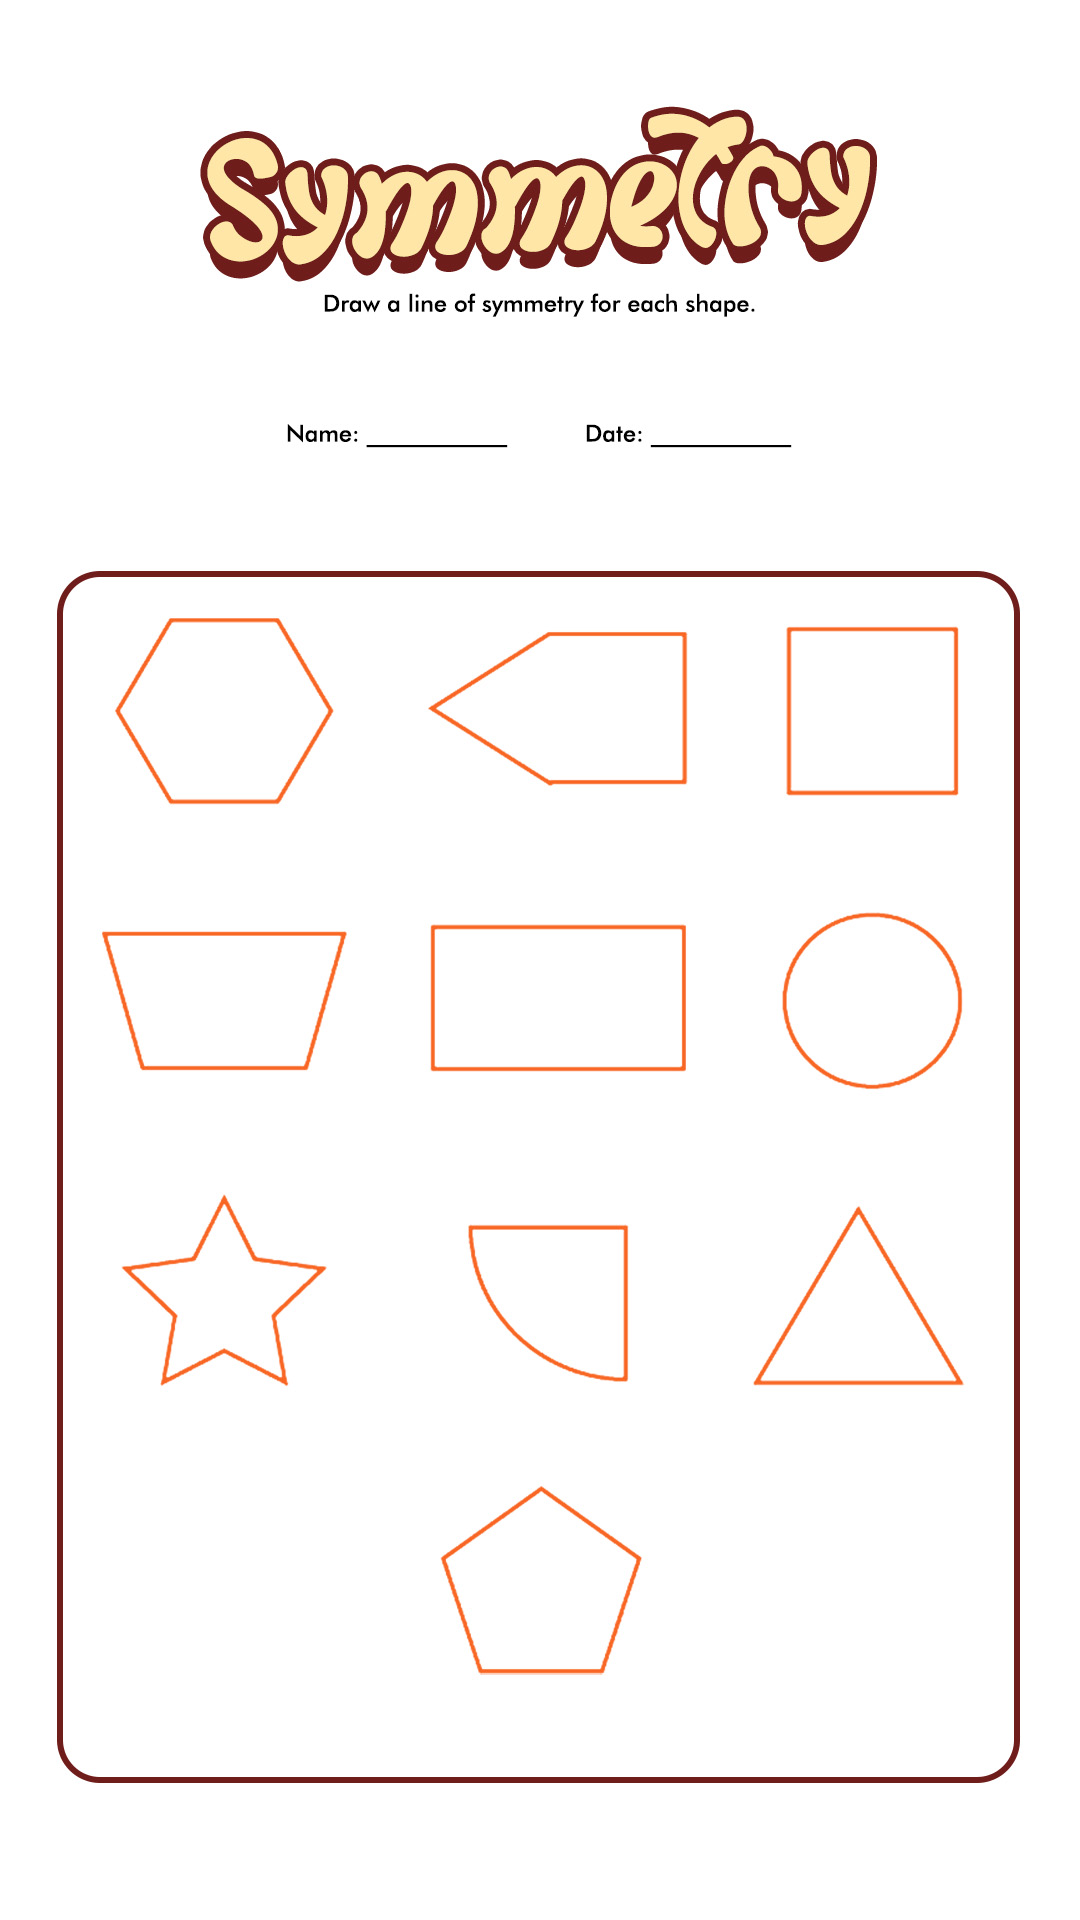 Drawing Lines of Symmetry Worksheet for 4th Grade